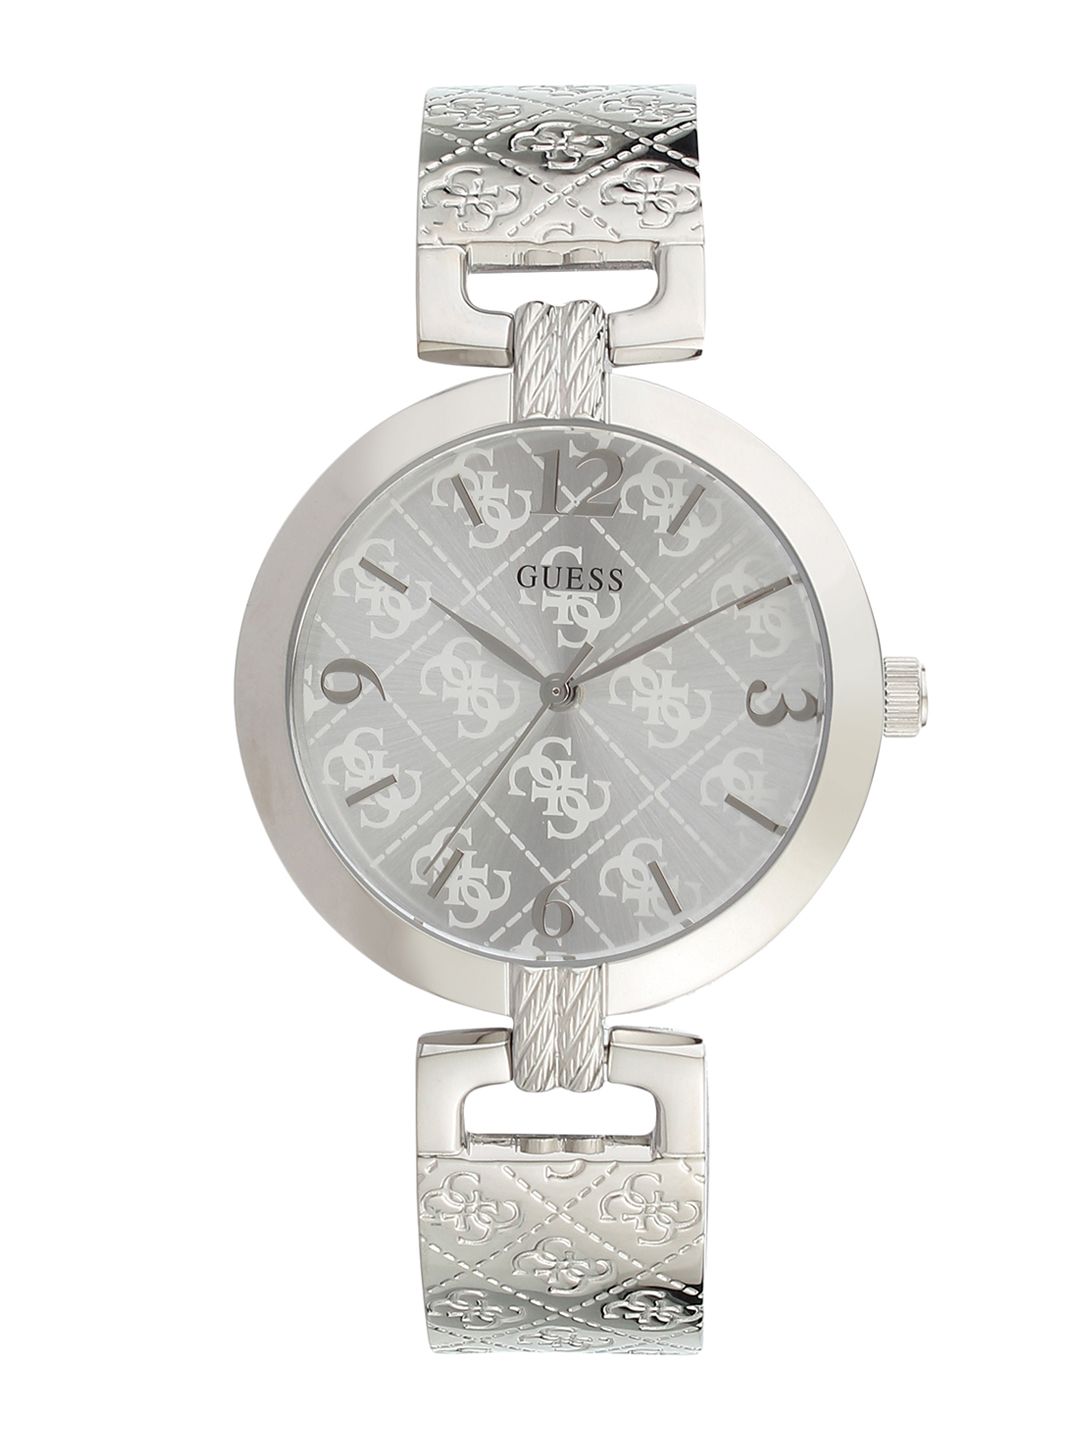 GUESS Women Silver-Toned Analogue Watch W1228L1 Price in India